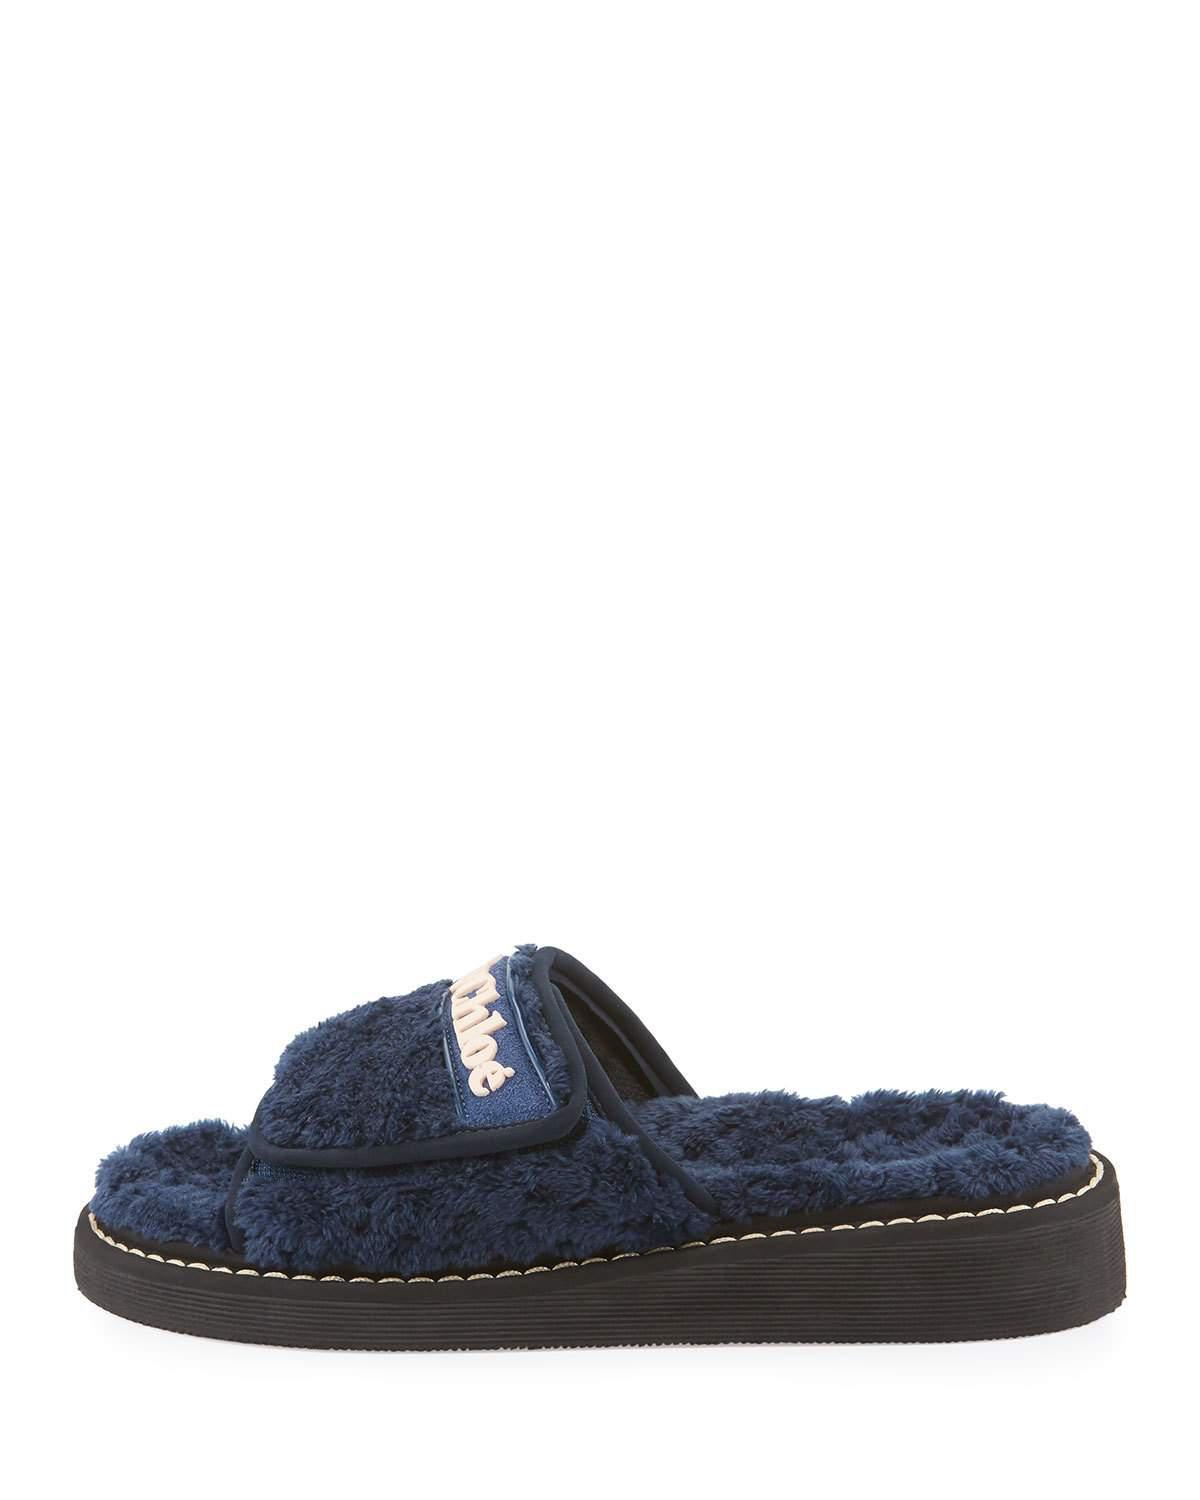 Lyst See By Chlo  Flat Terry Cloth  Sandal  Slide  in Blue